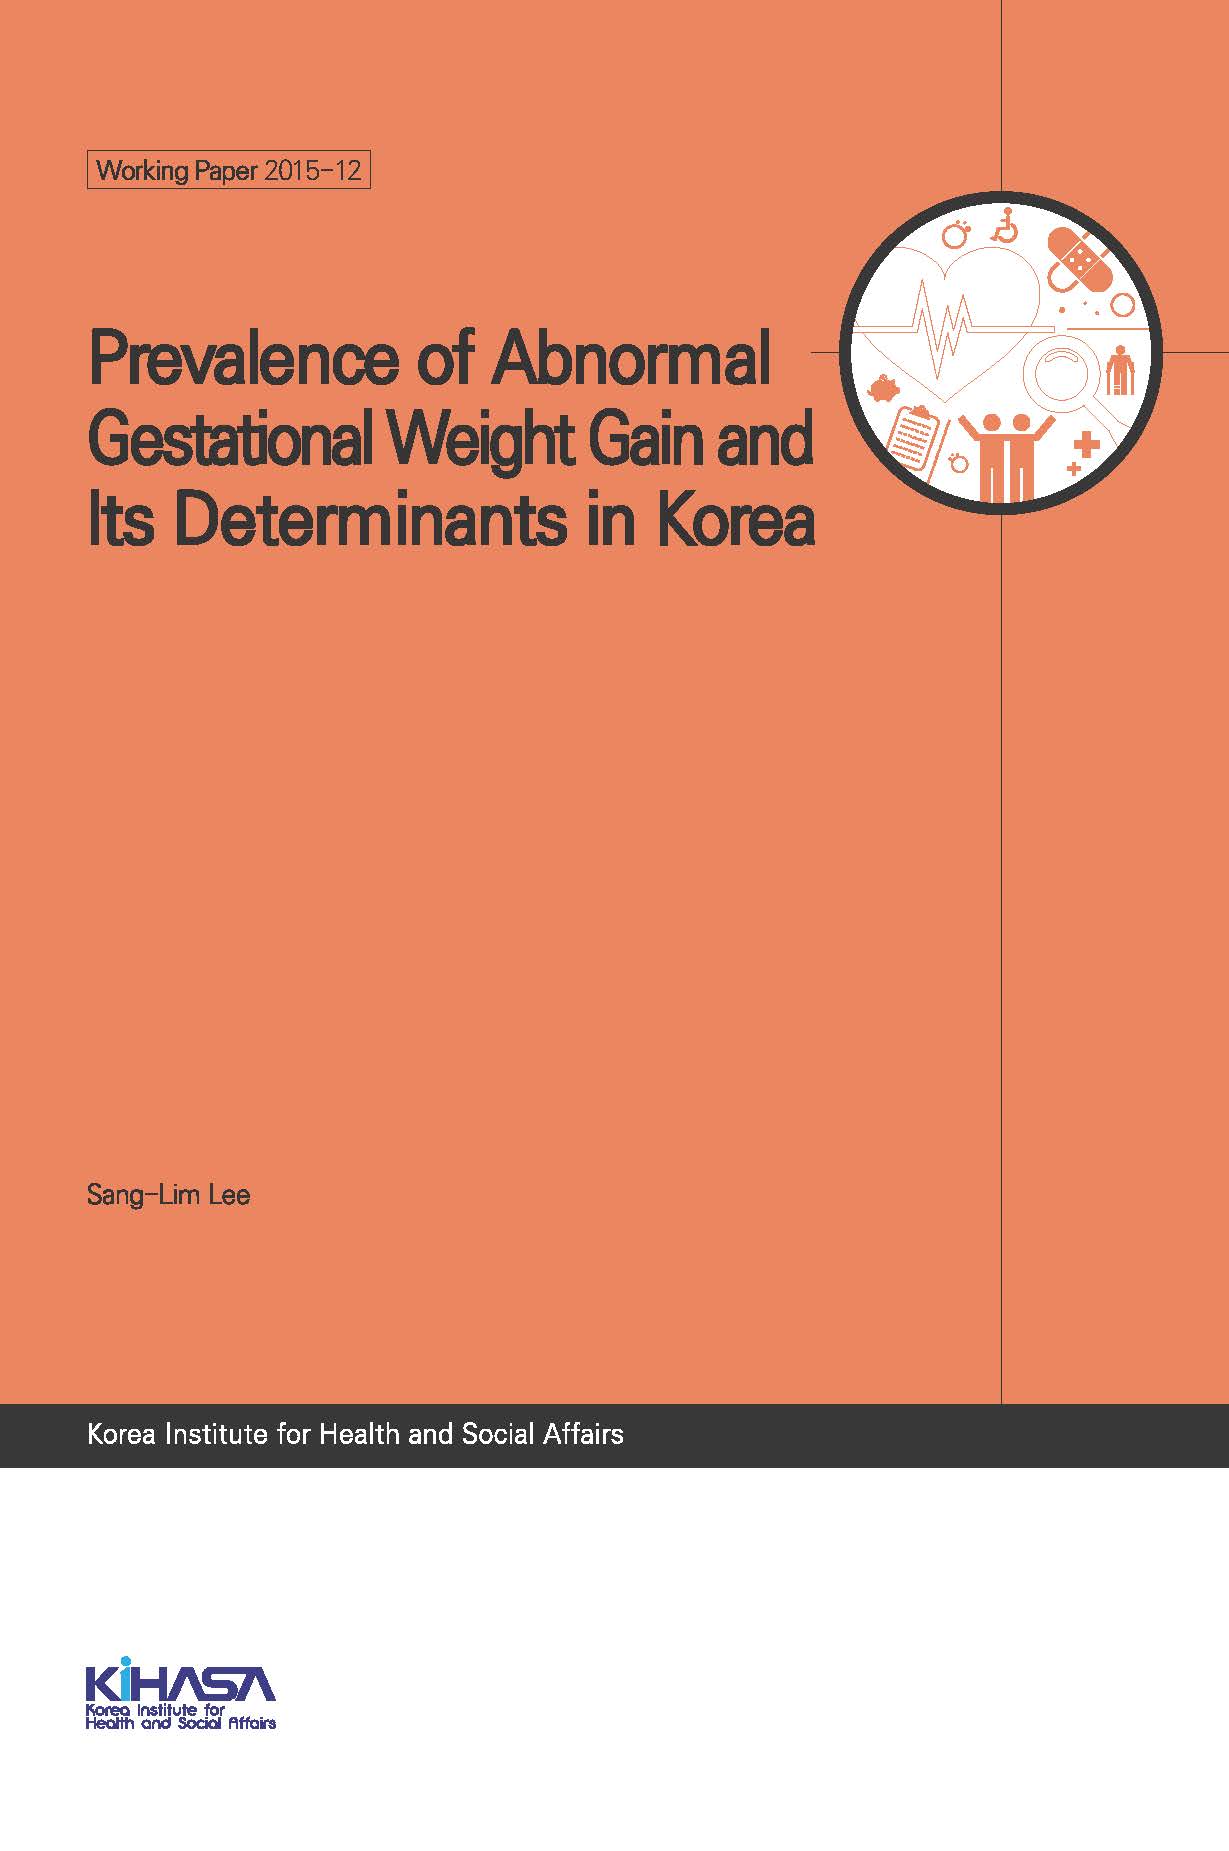 Prevalence of Abnormal Gestational Weight Gain and lts Determinants in Korea